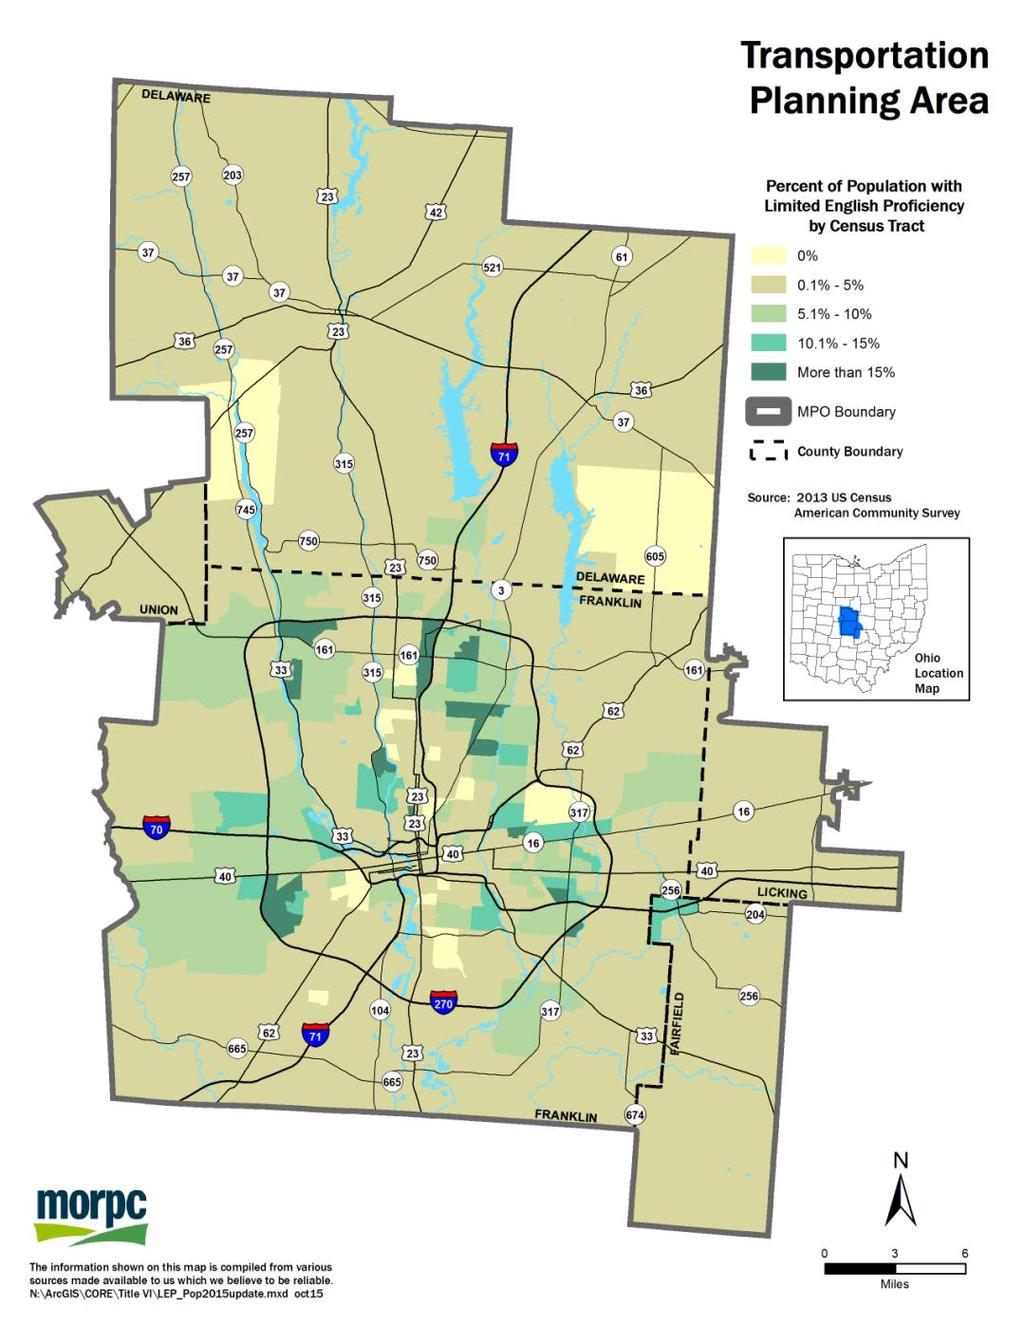 Identification of LEP population The LEP population was mapped to show LEP individuals as a percent of total population by census tract as shown in the attached map.